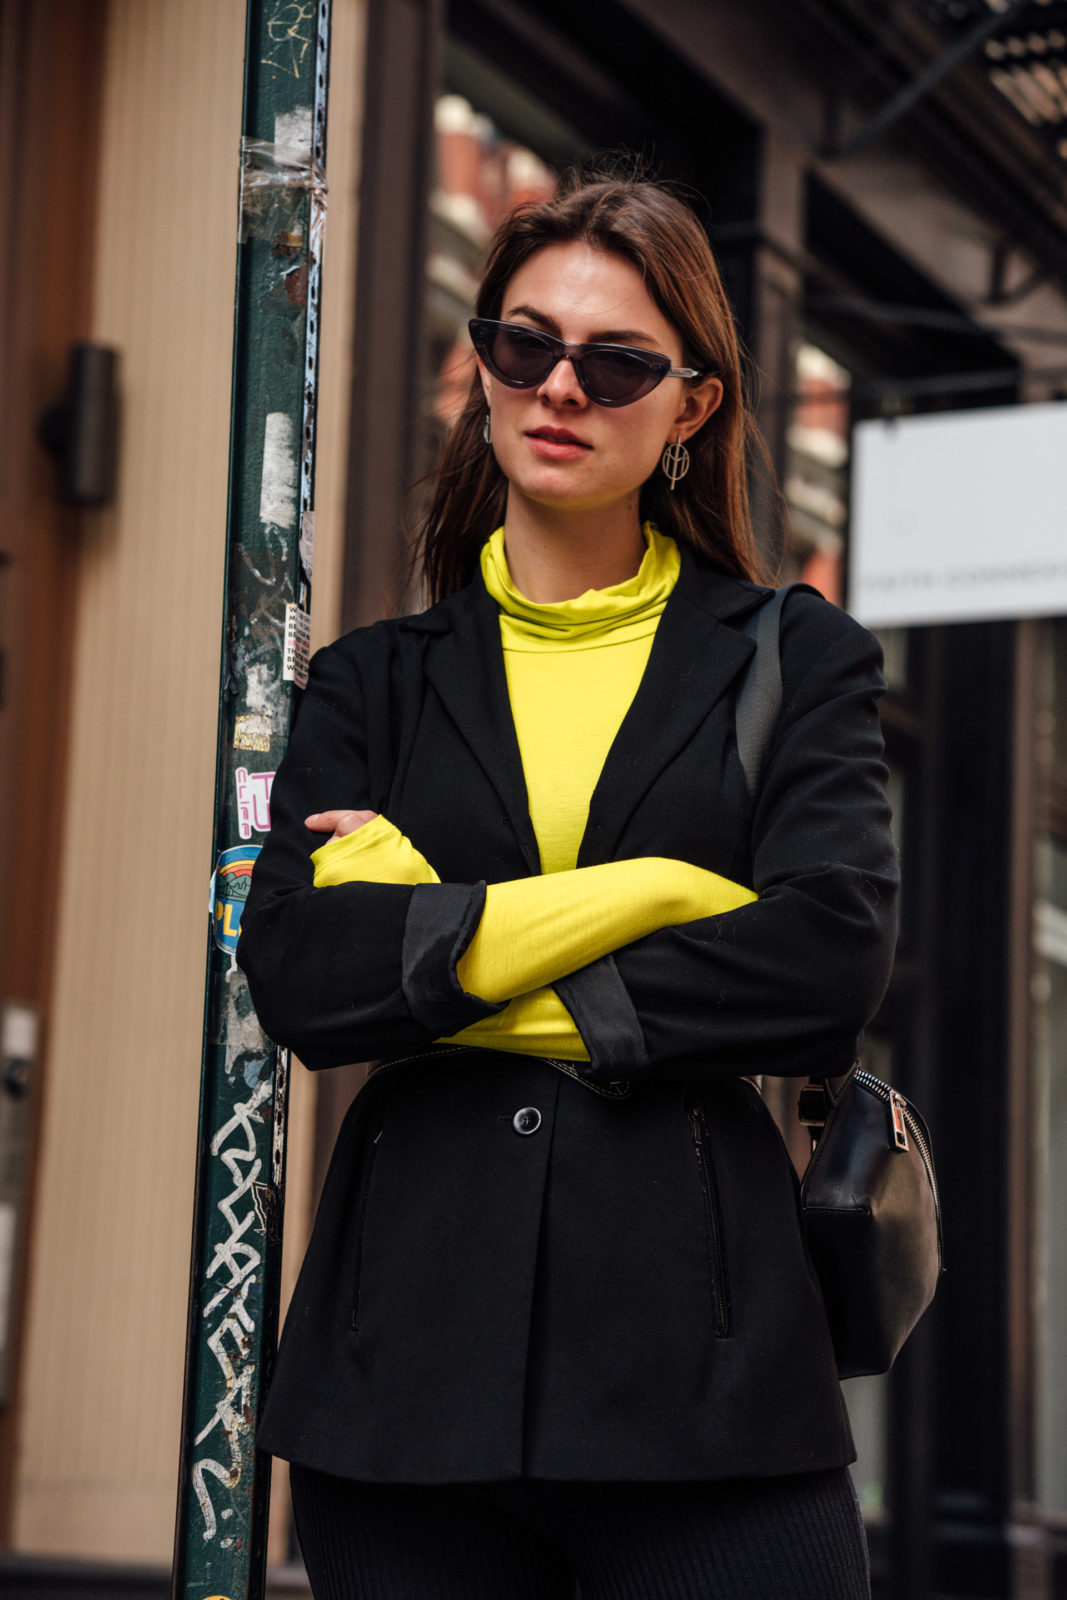 How to wear neon this spring || Fashionblog Berlin